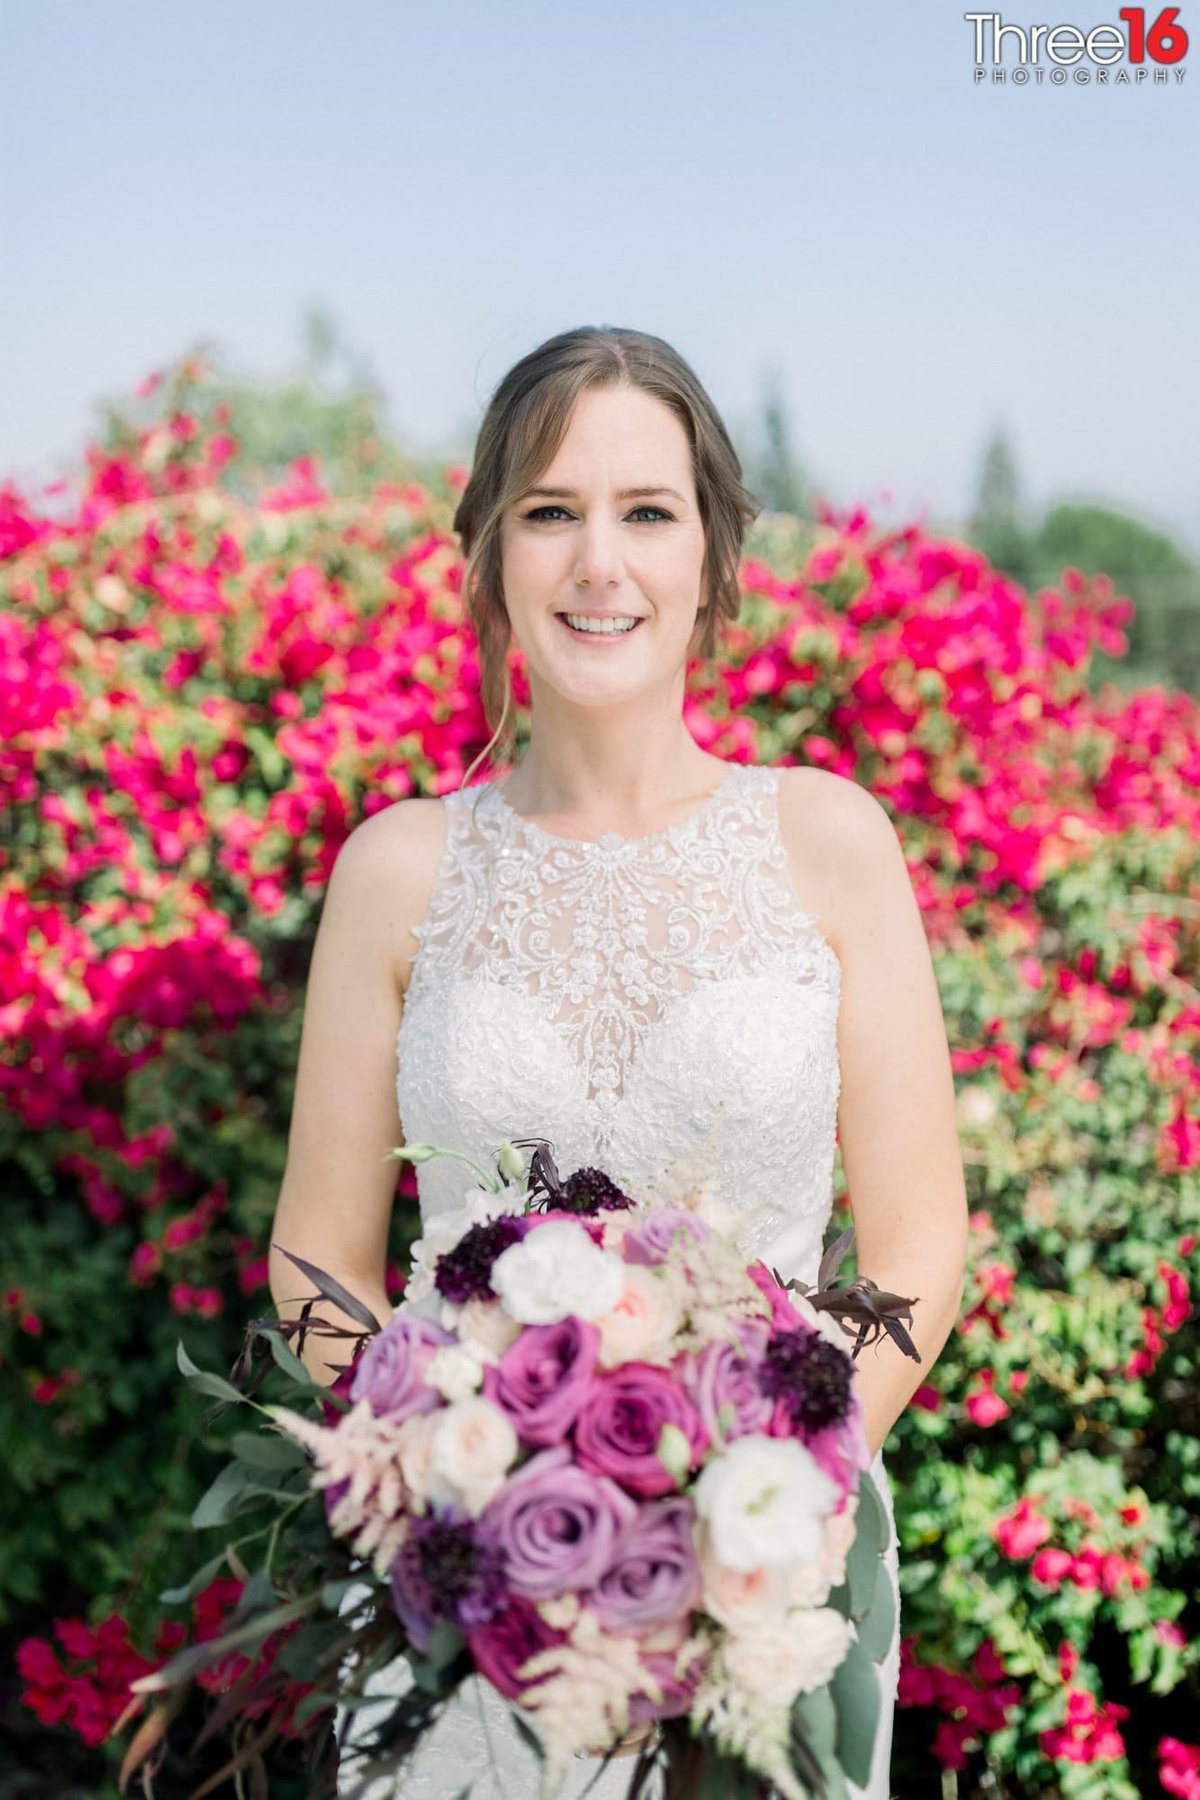 Beautiful Bride poses holding her purple and white floral bouquet